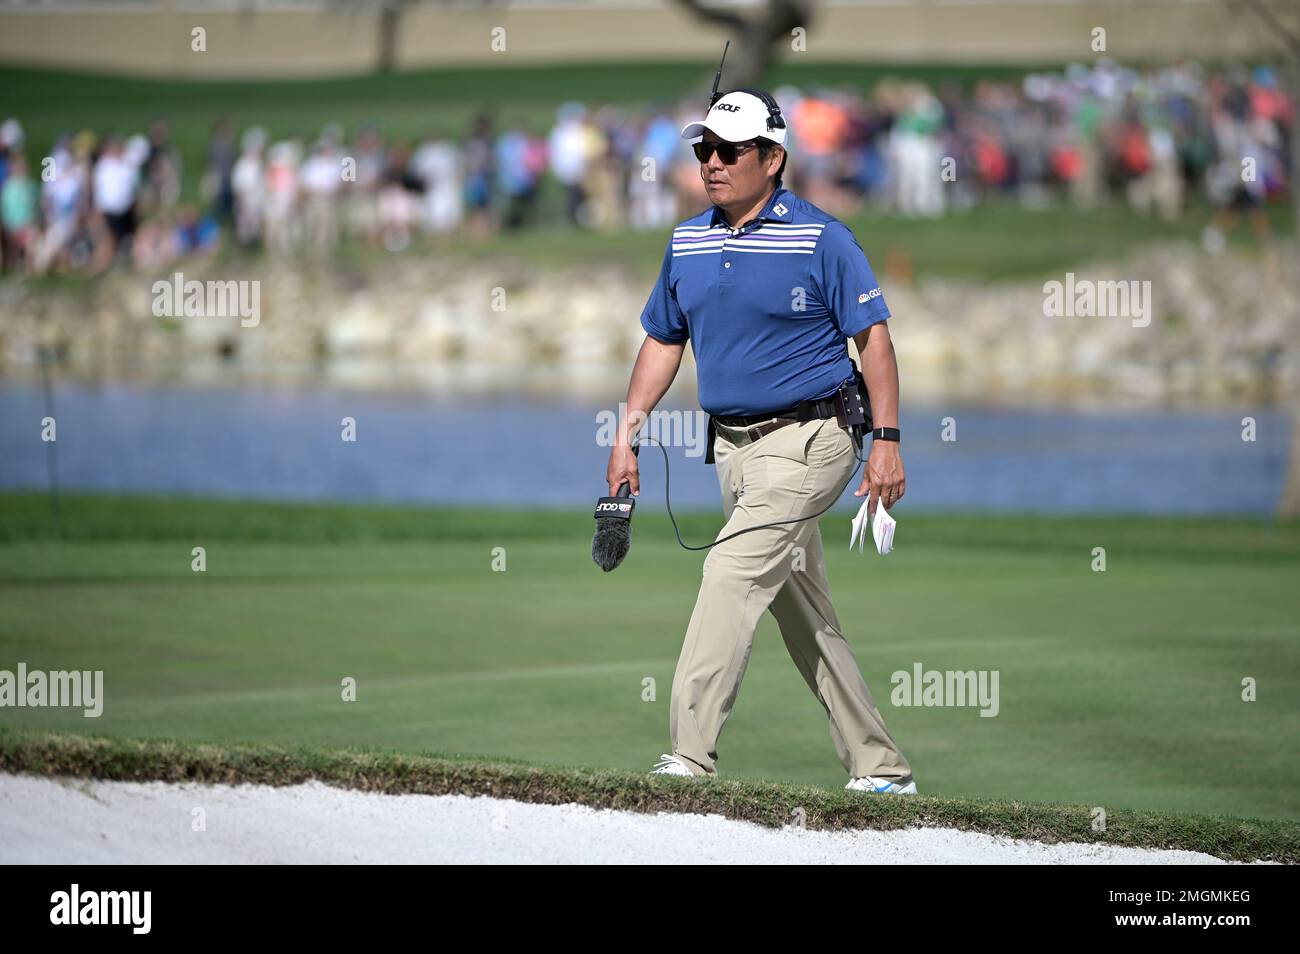 NBC Sports and Golf Channel television analyst Notah Begay III walks onto the 14th green during the final round of the Arnold Palmer Invitational golf tournament, Sunday, March 8, 2020, in Orlando,